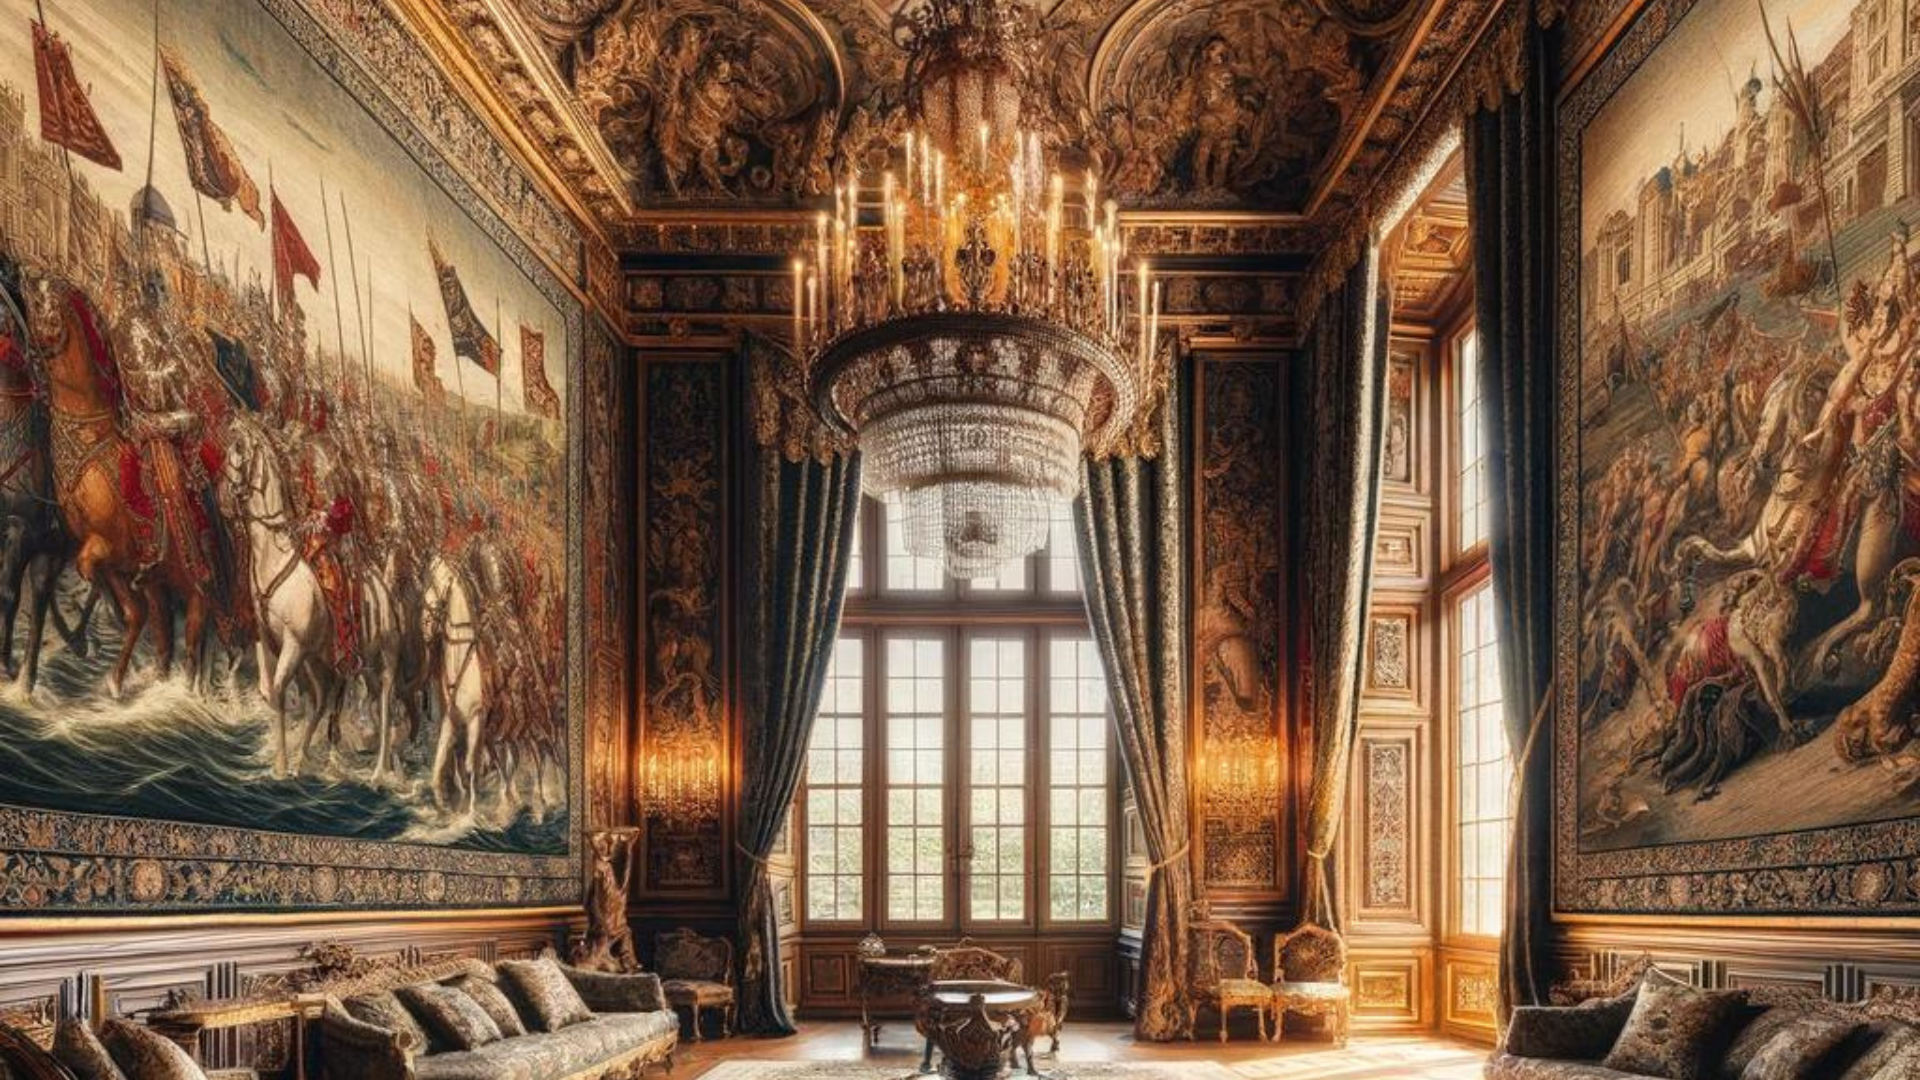 Grand room in a royal household with detailed tapestries on the walls, featuring historic battles and mythical creatures, under the glow of an ornate chandelier.